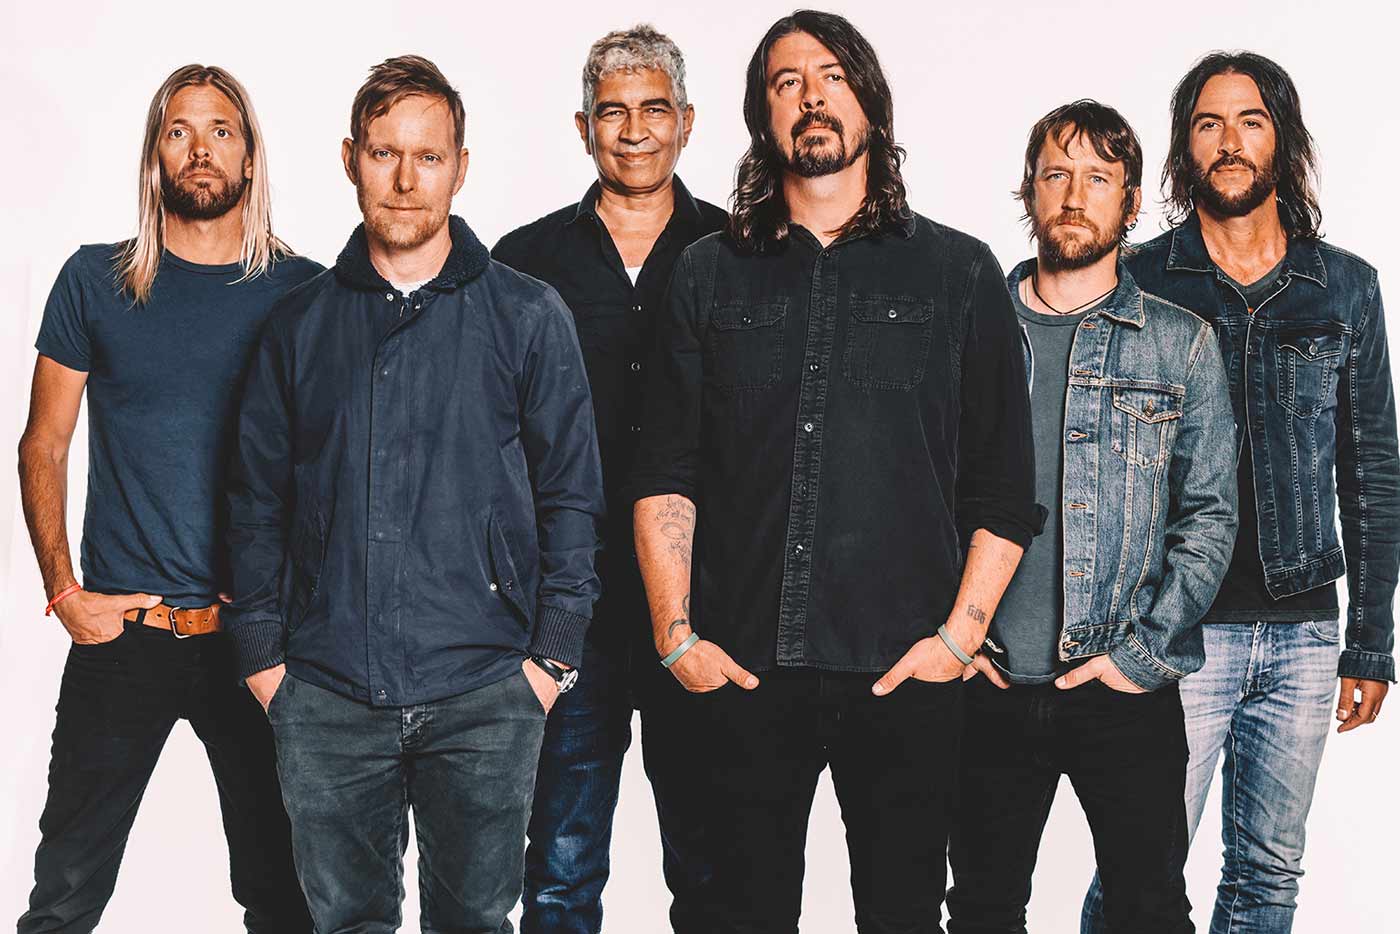 Foo Fighters versionan "Never Gonna Give You Up" con Rick Astley